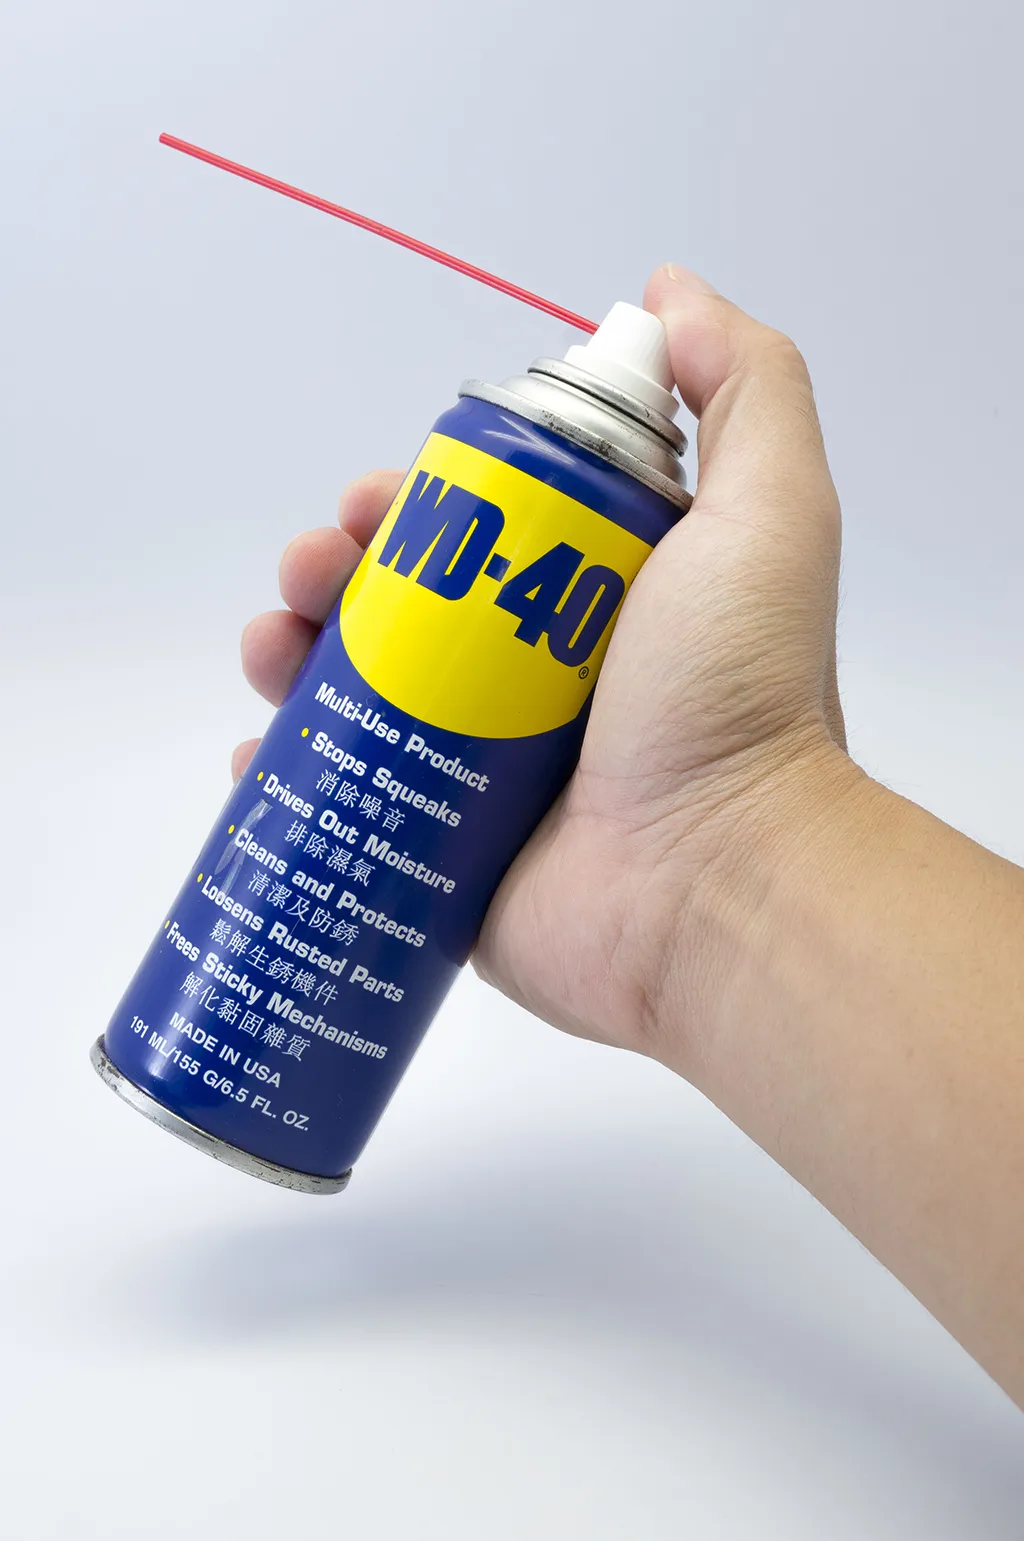 WD 40 oil, over 40